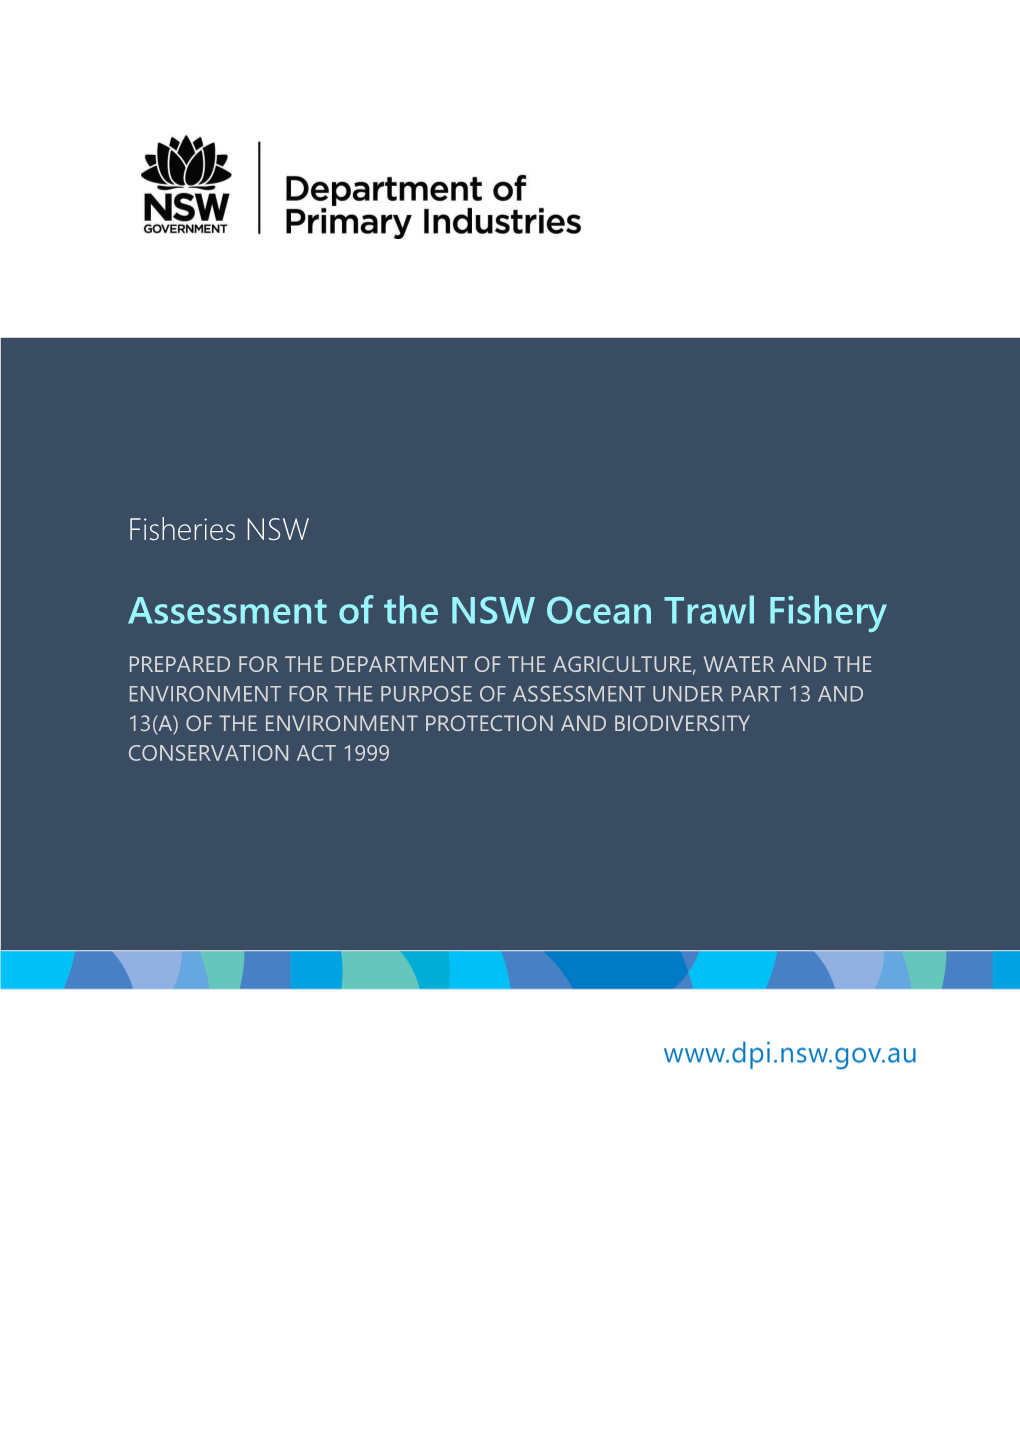 Assessment of the NSW Ocean Trawl Fishery